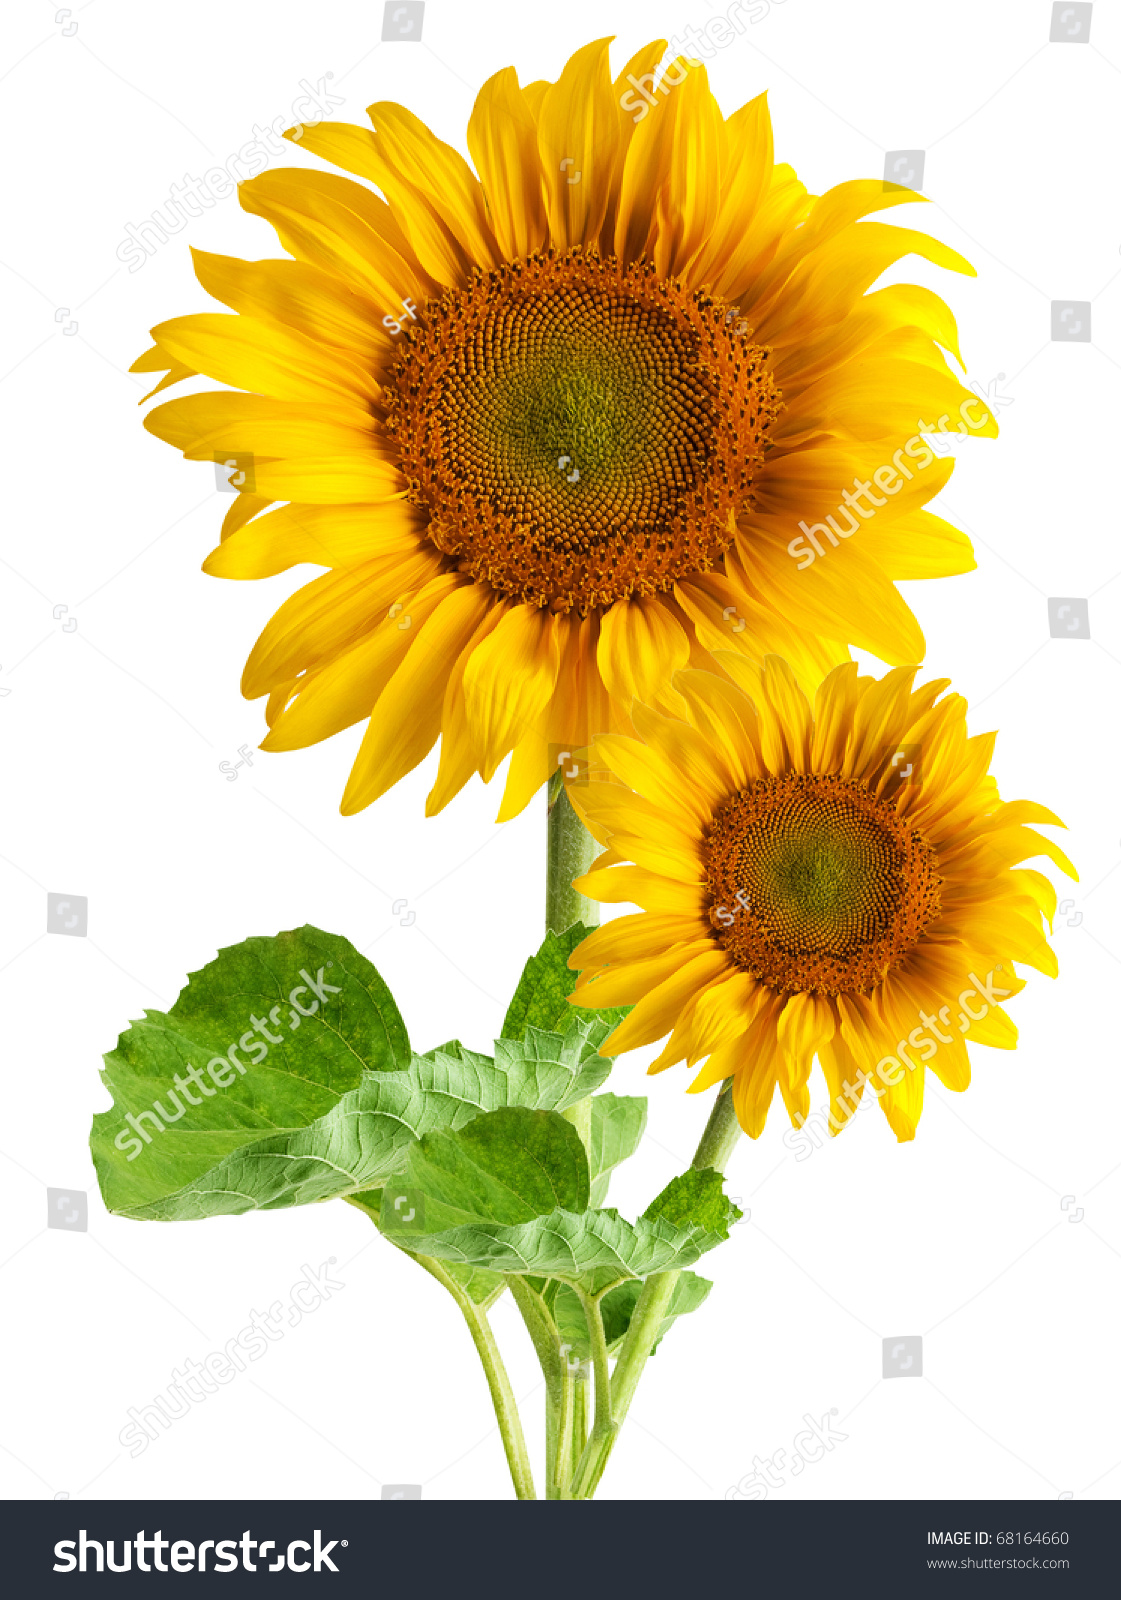 The Beautiful Sunflower Isolated On A White Background Stock Photo